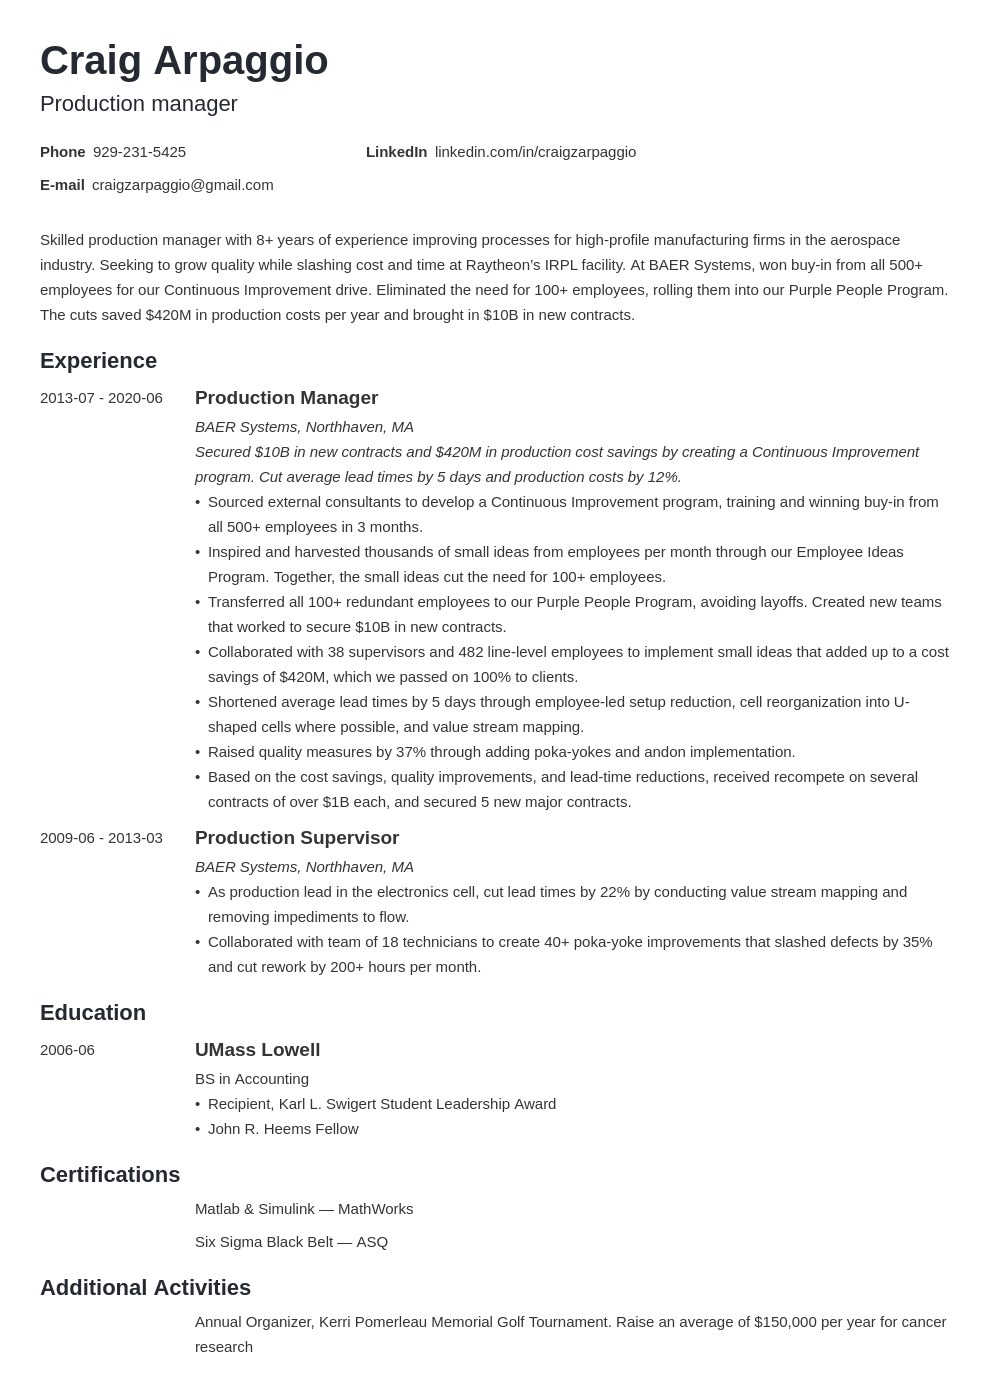 Cv For Production Manager / Video Production Manager Resume Samples